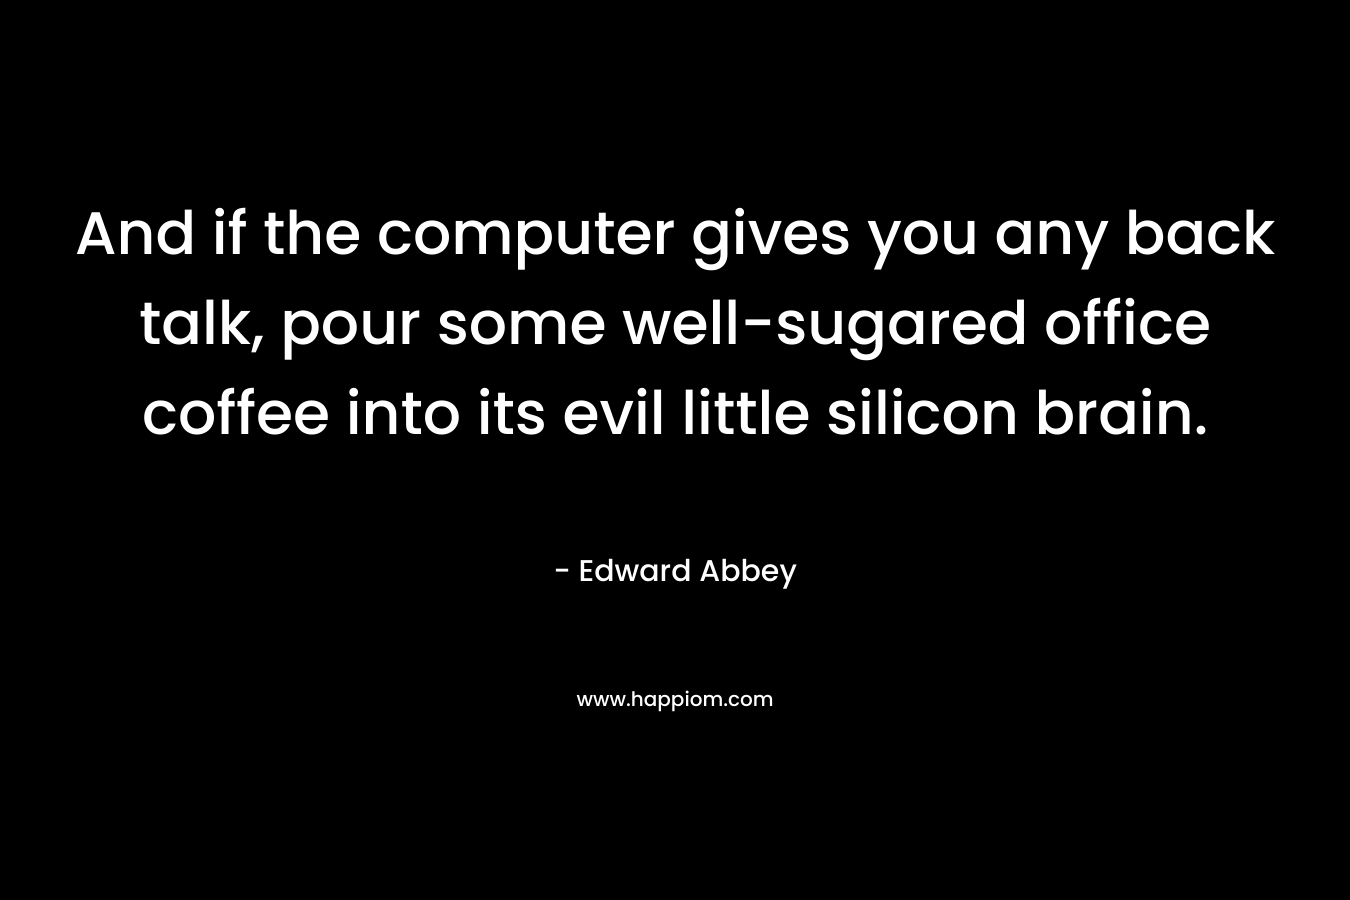 And if the computer gives you any back talk, pour some well-sugared office coffee into its evil little silicon brain. – Edward Abbey